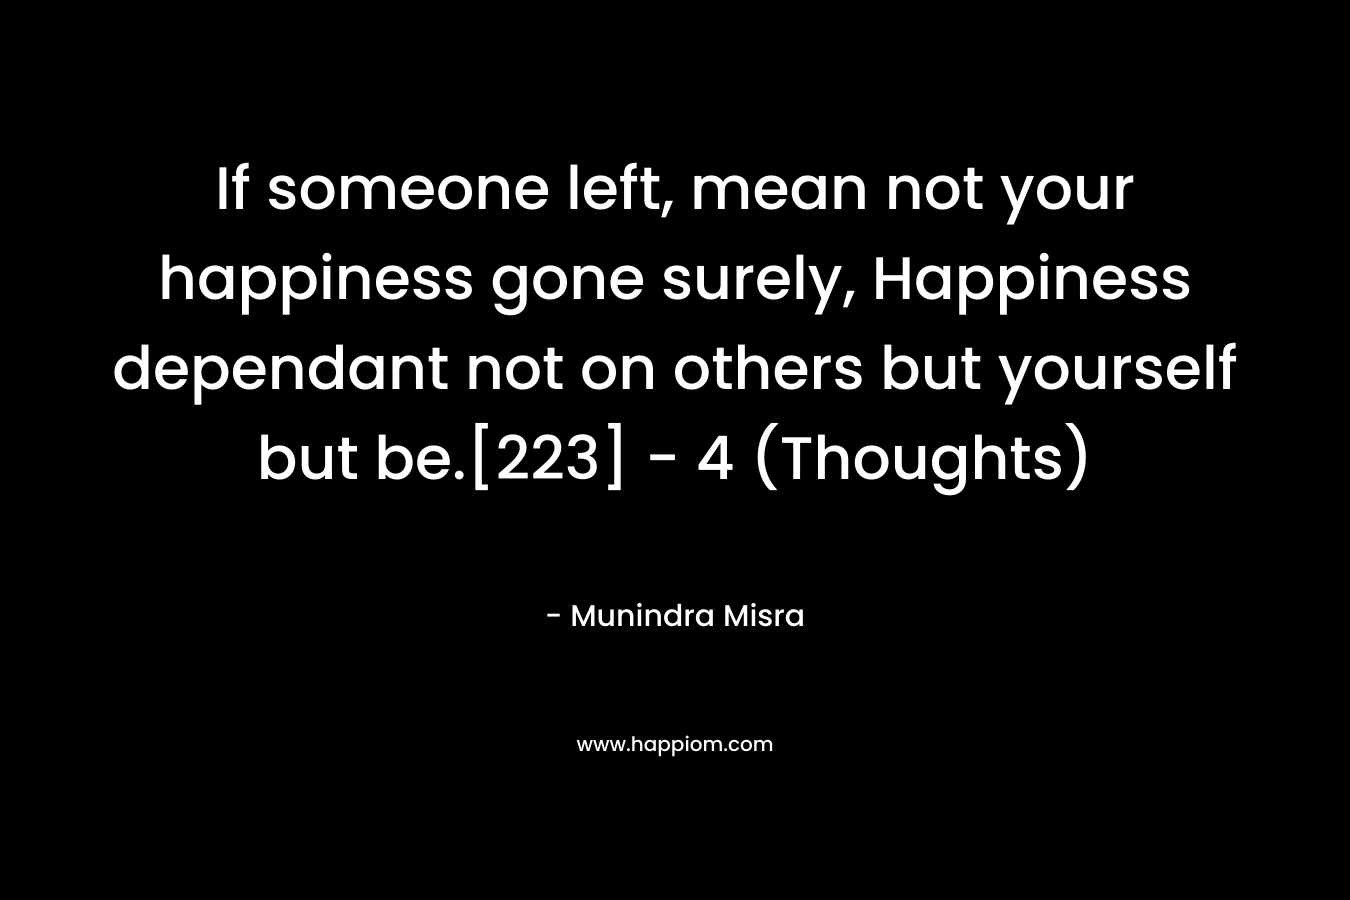 If someone left, mean not your happiness gone surely, Happiness dependant not on others but yourself but be.[223]	- 4 (Thoughts)